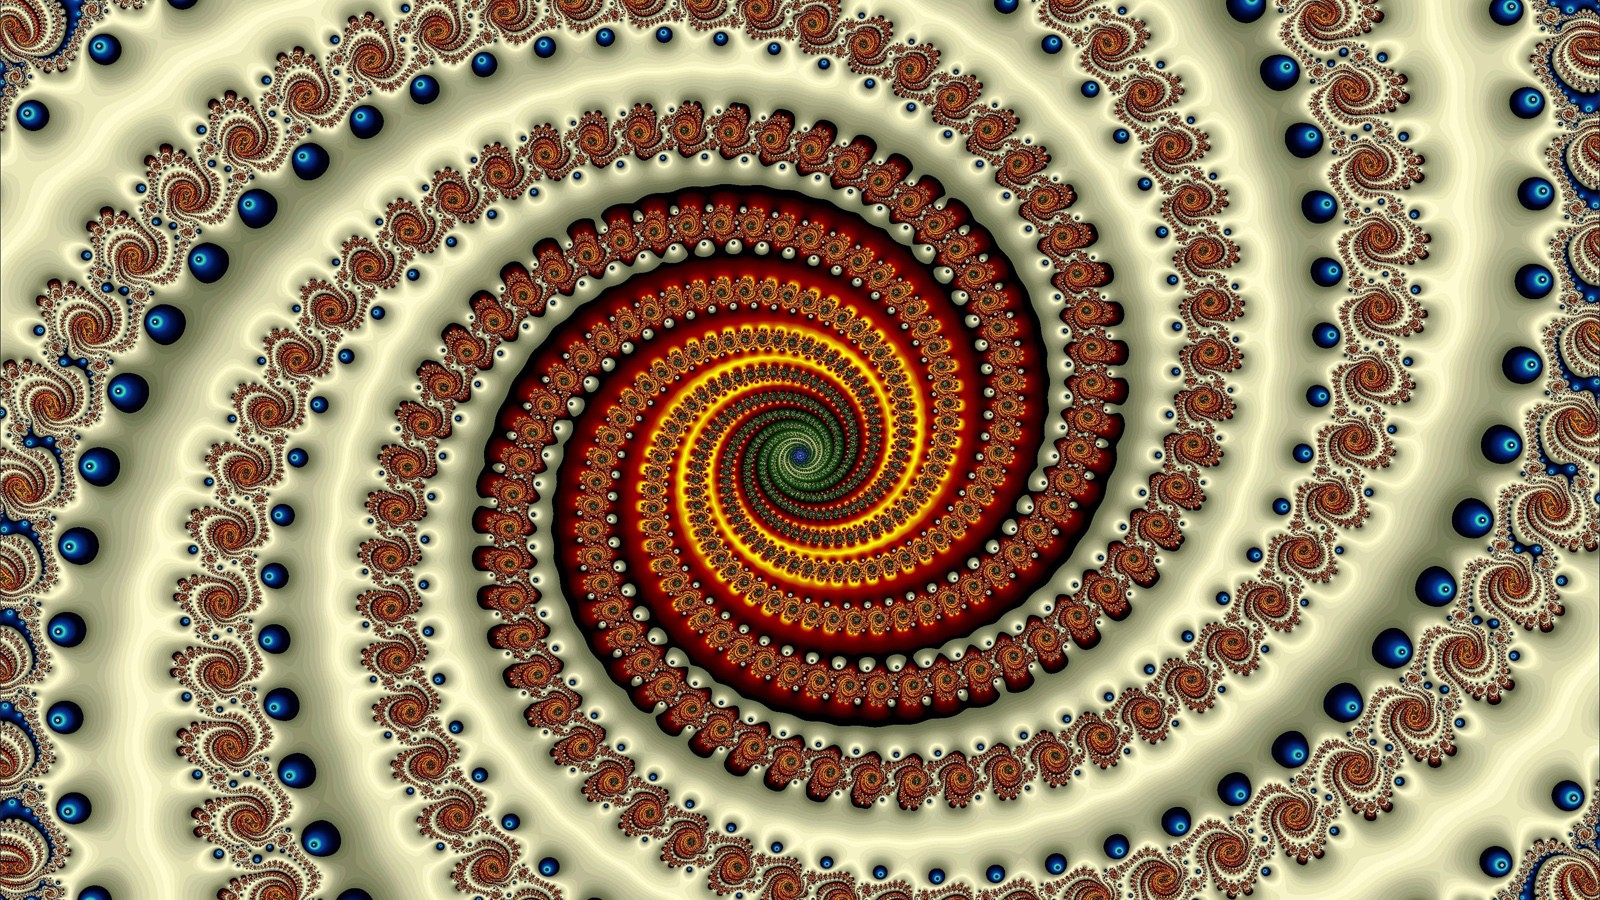 General 1600x900 fractal spiral abstract